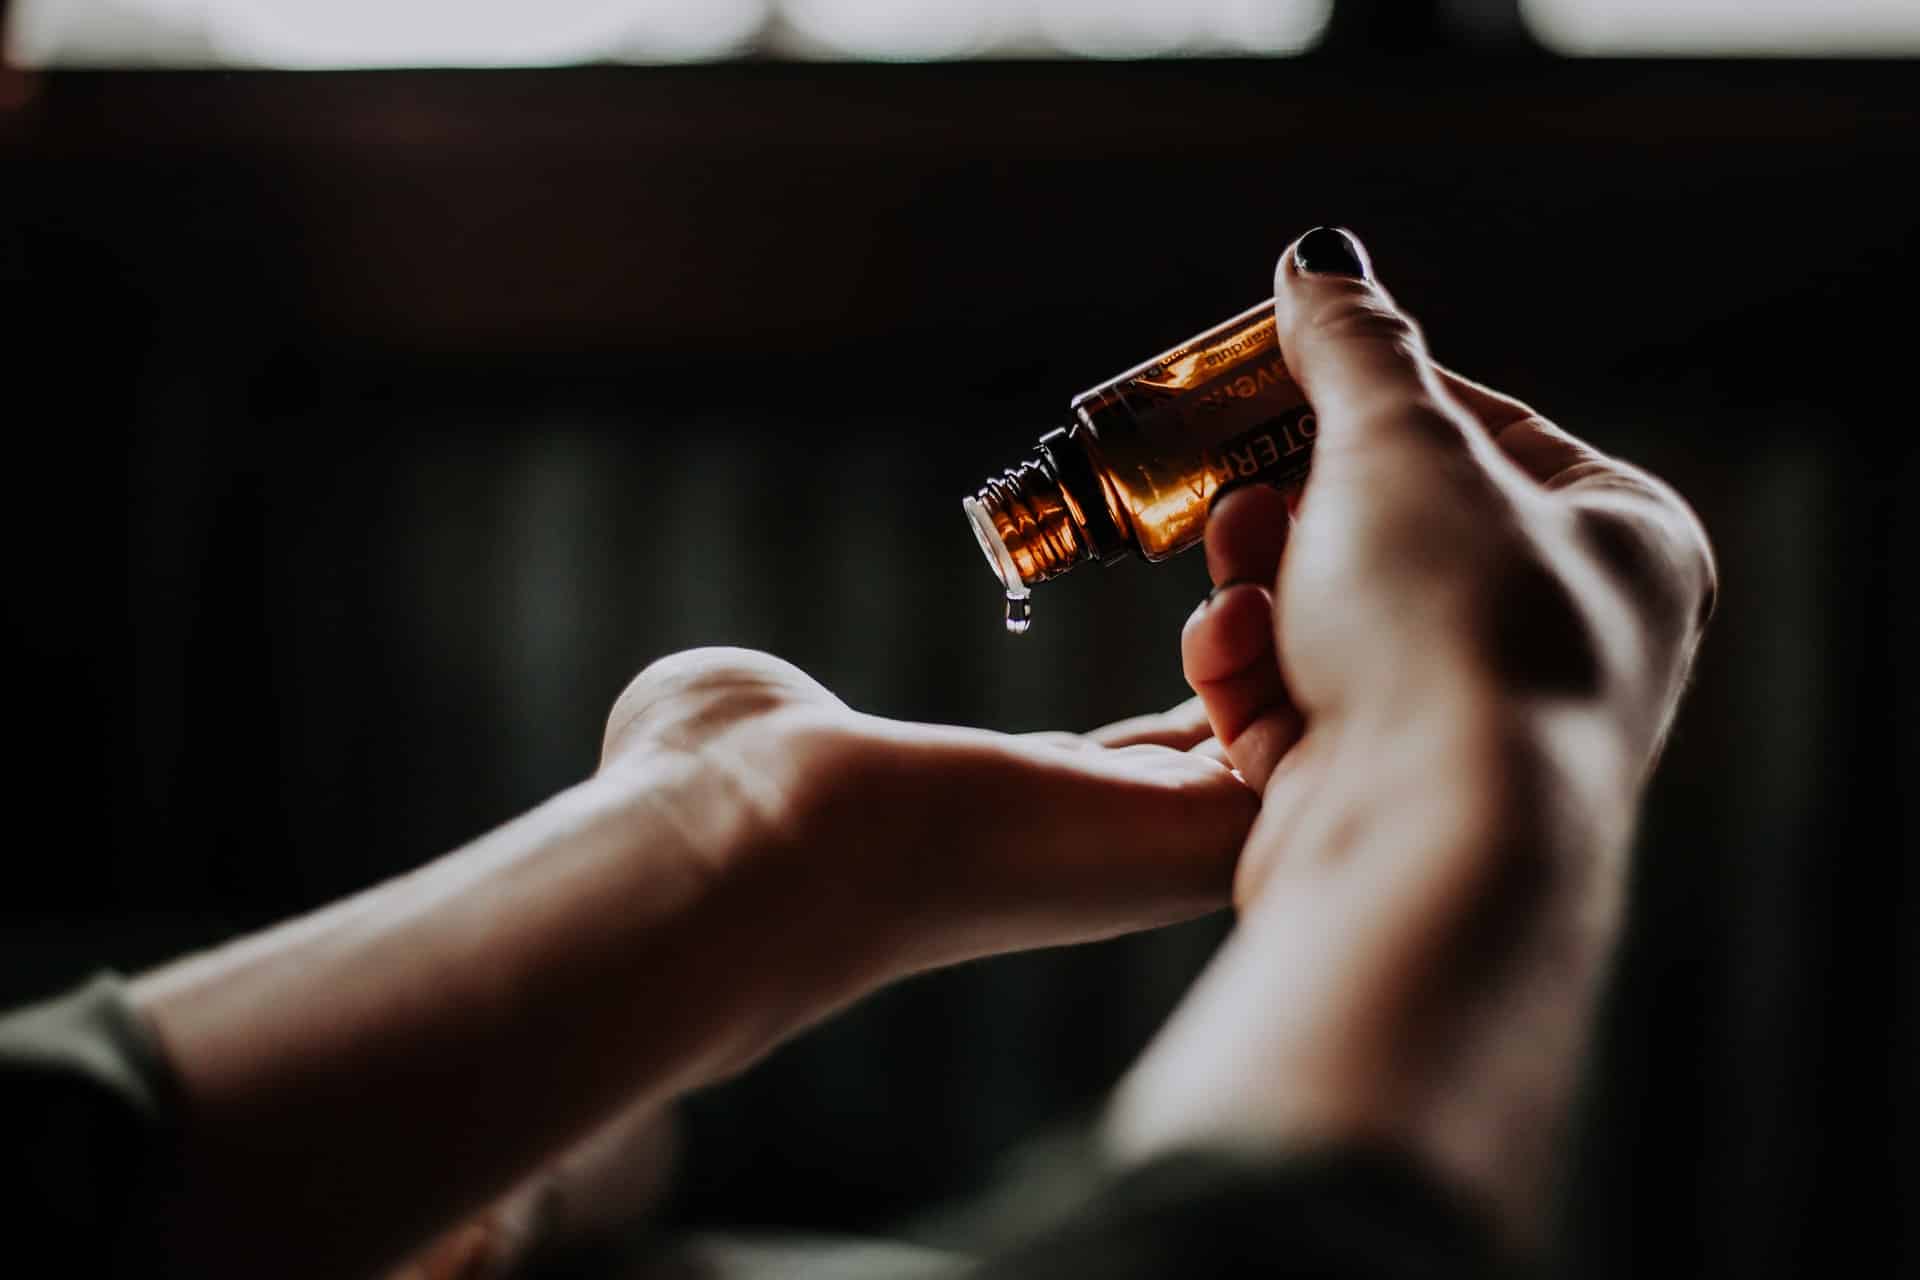 Essential oil being dripped on a palm of a hand